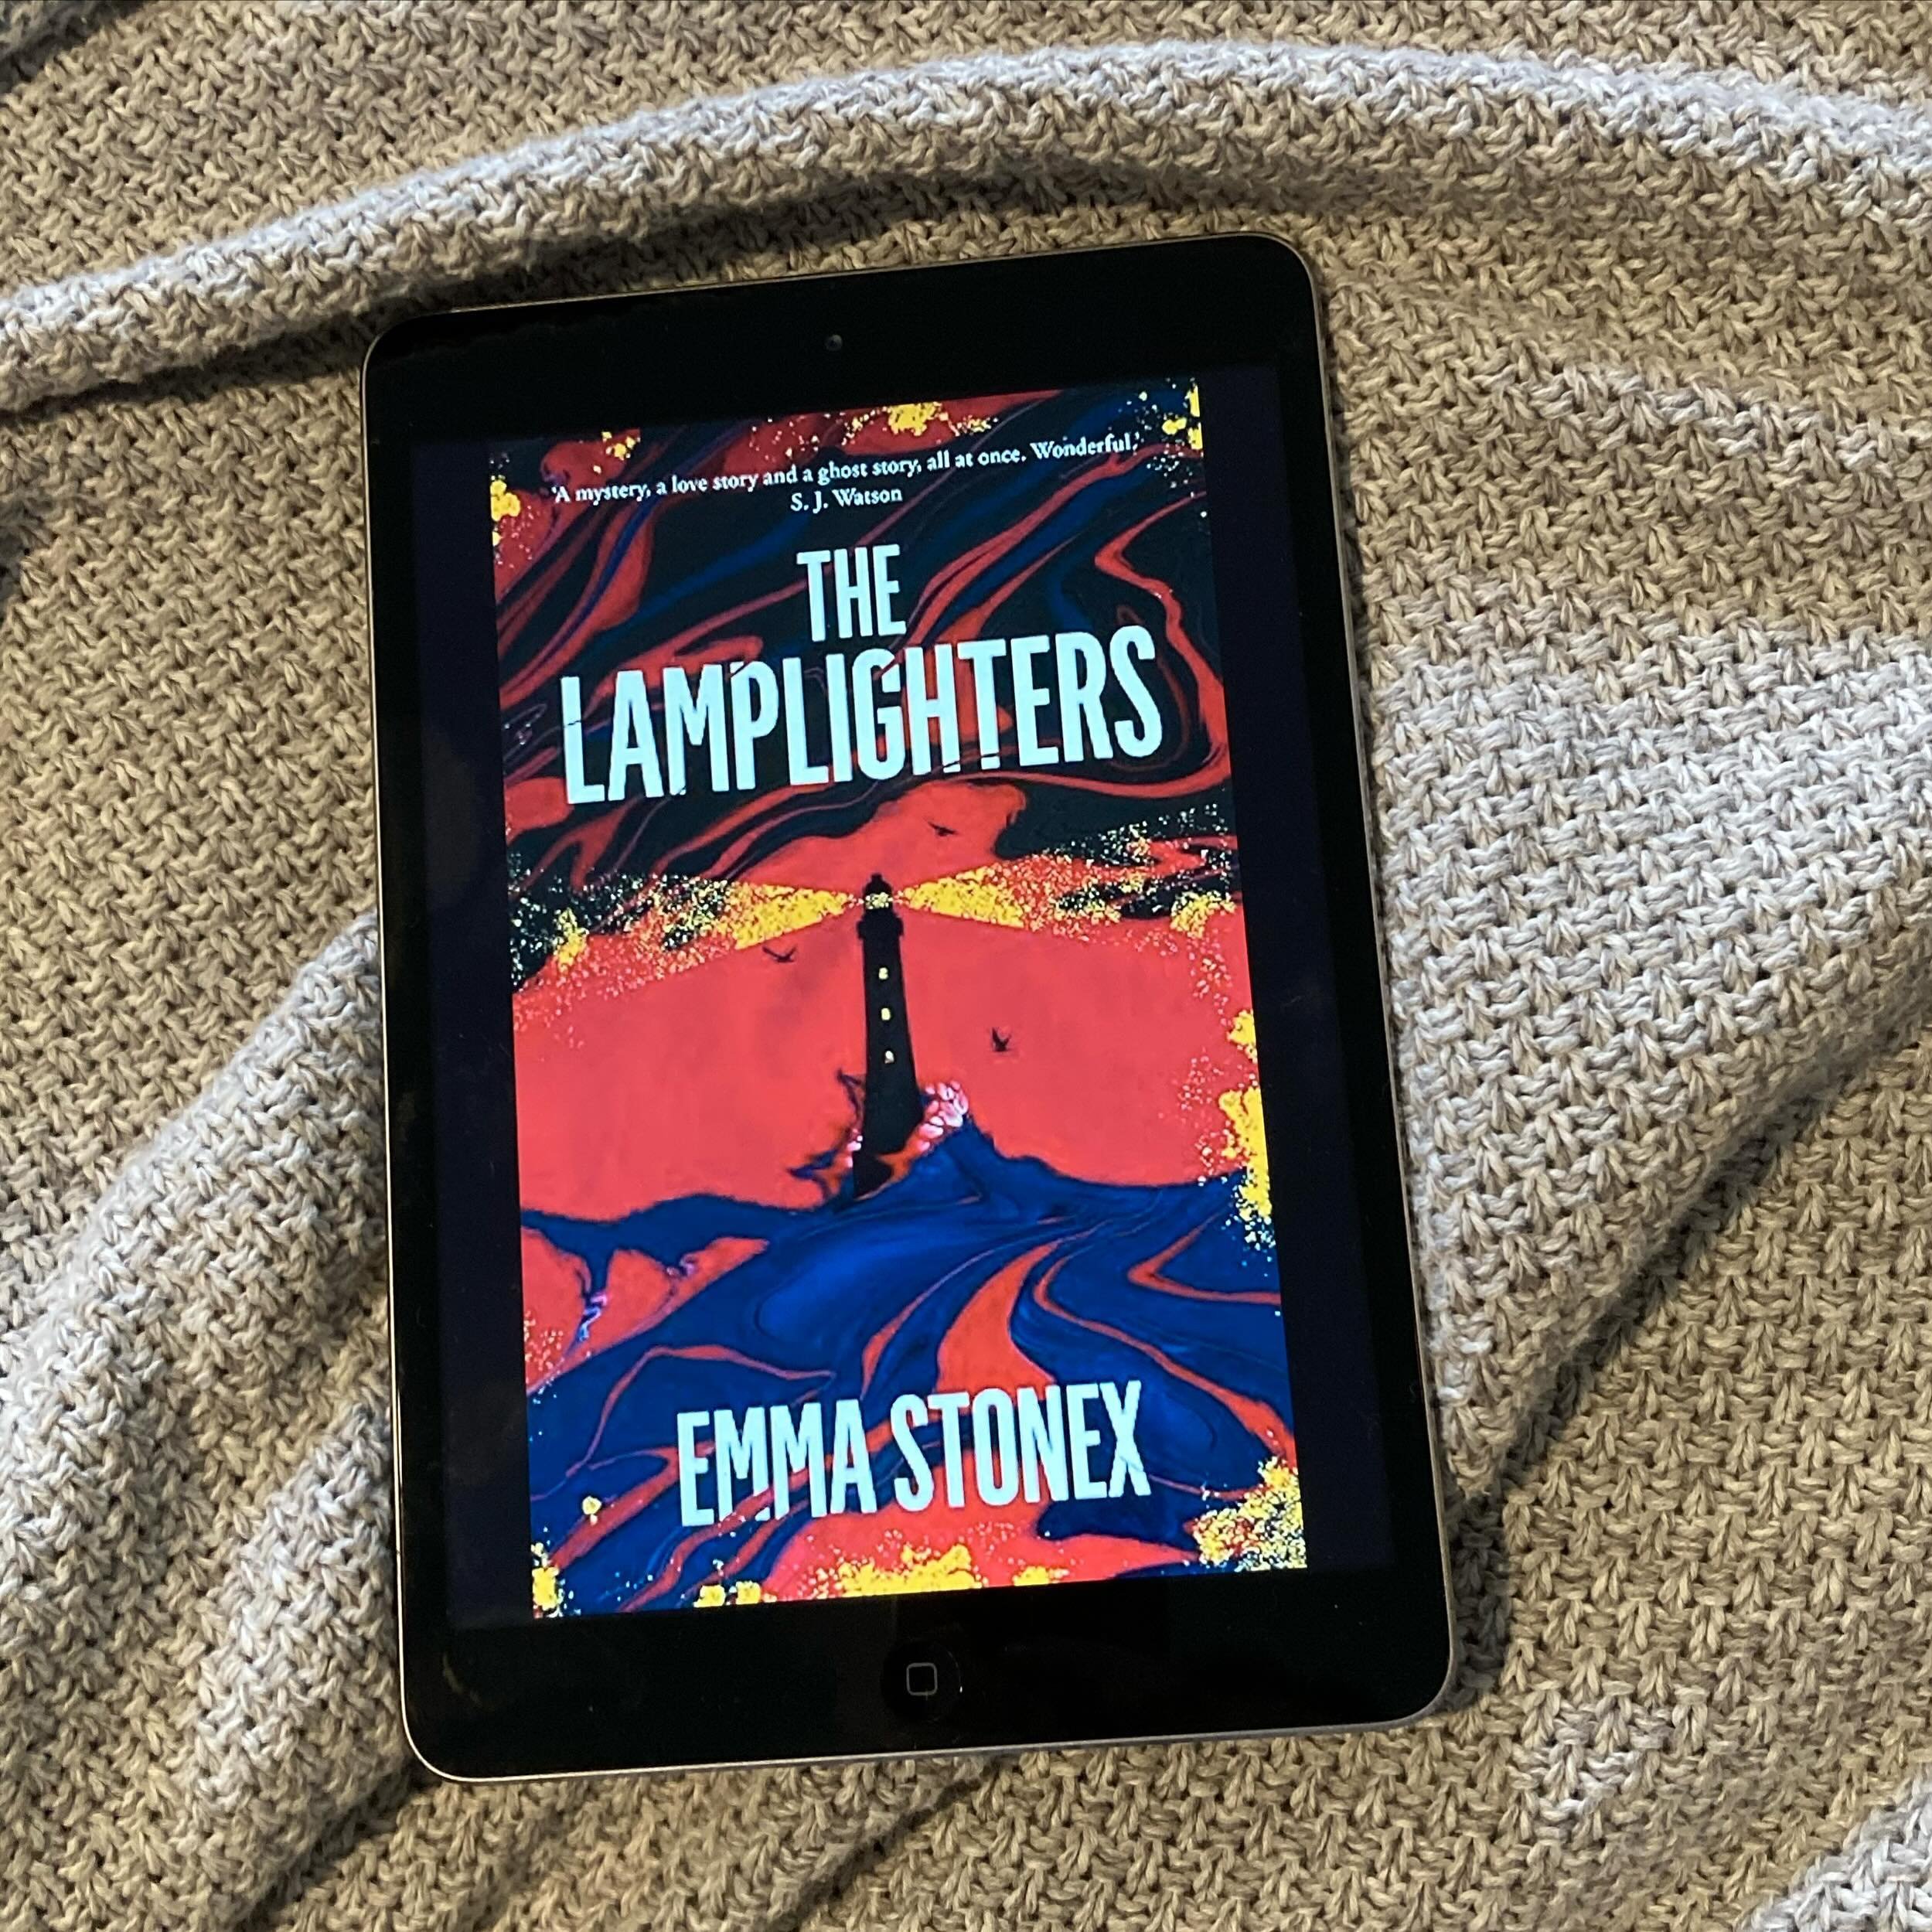 The Lamplighters by @stonexemma 

Lighthouse plus real life mystery (fictionalised) plus dual timelines. What more do I need to say. I loved this story. I listened to the audiobook of it and it was brilliant. I was riveted!

And the idea of living 8 